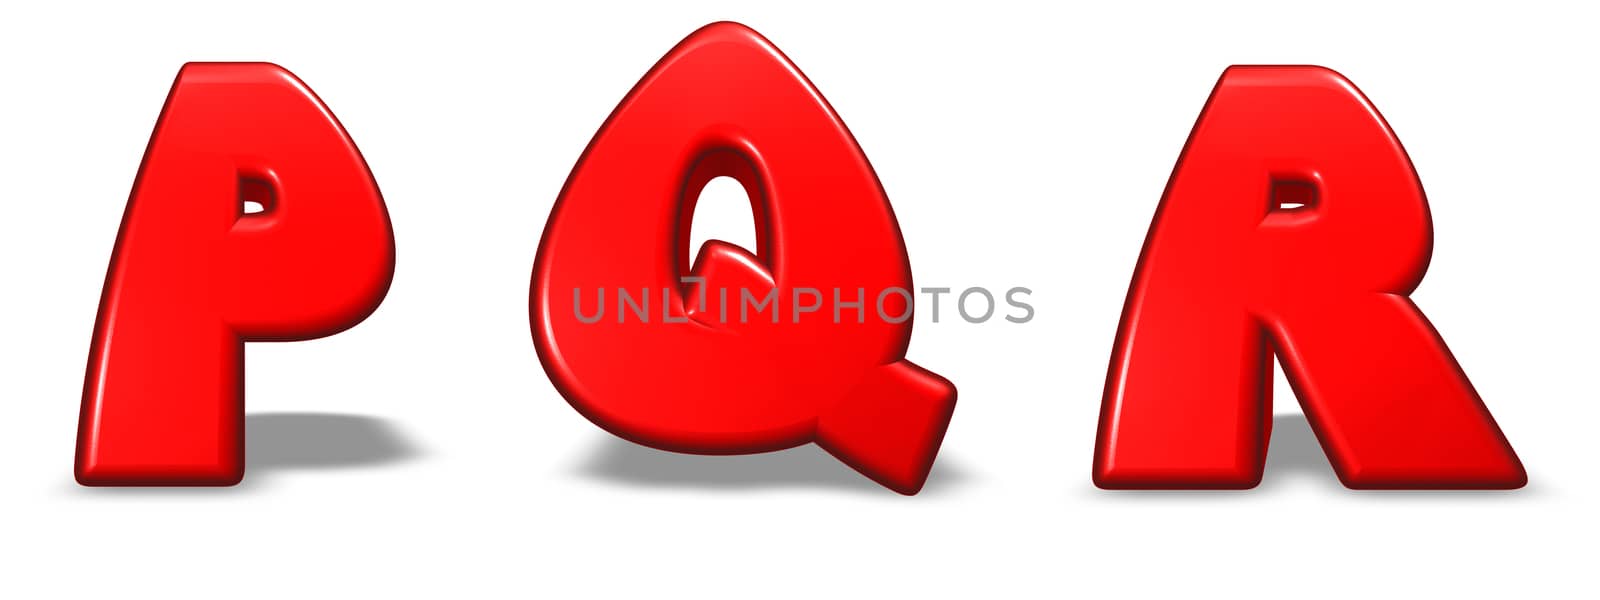 red letters p, q and r on white background - 3d illustration